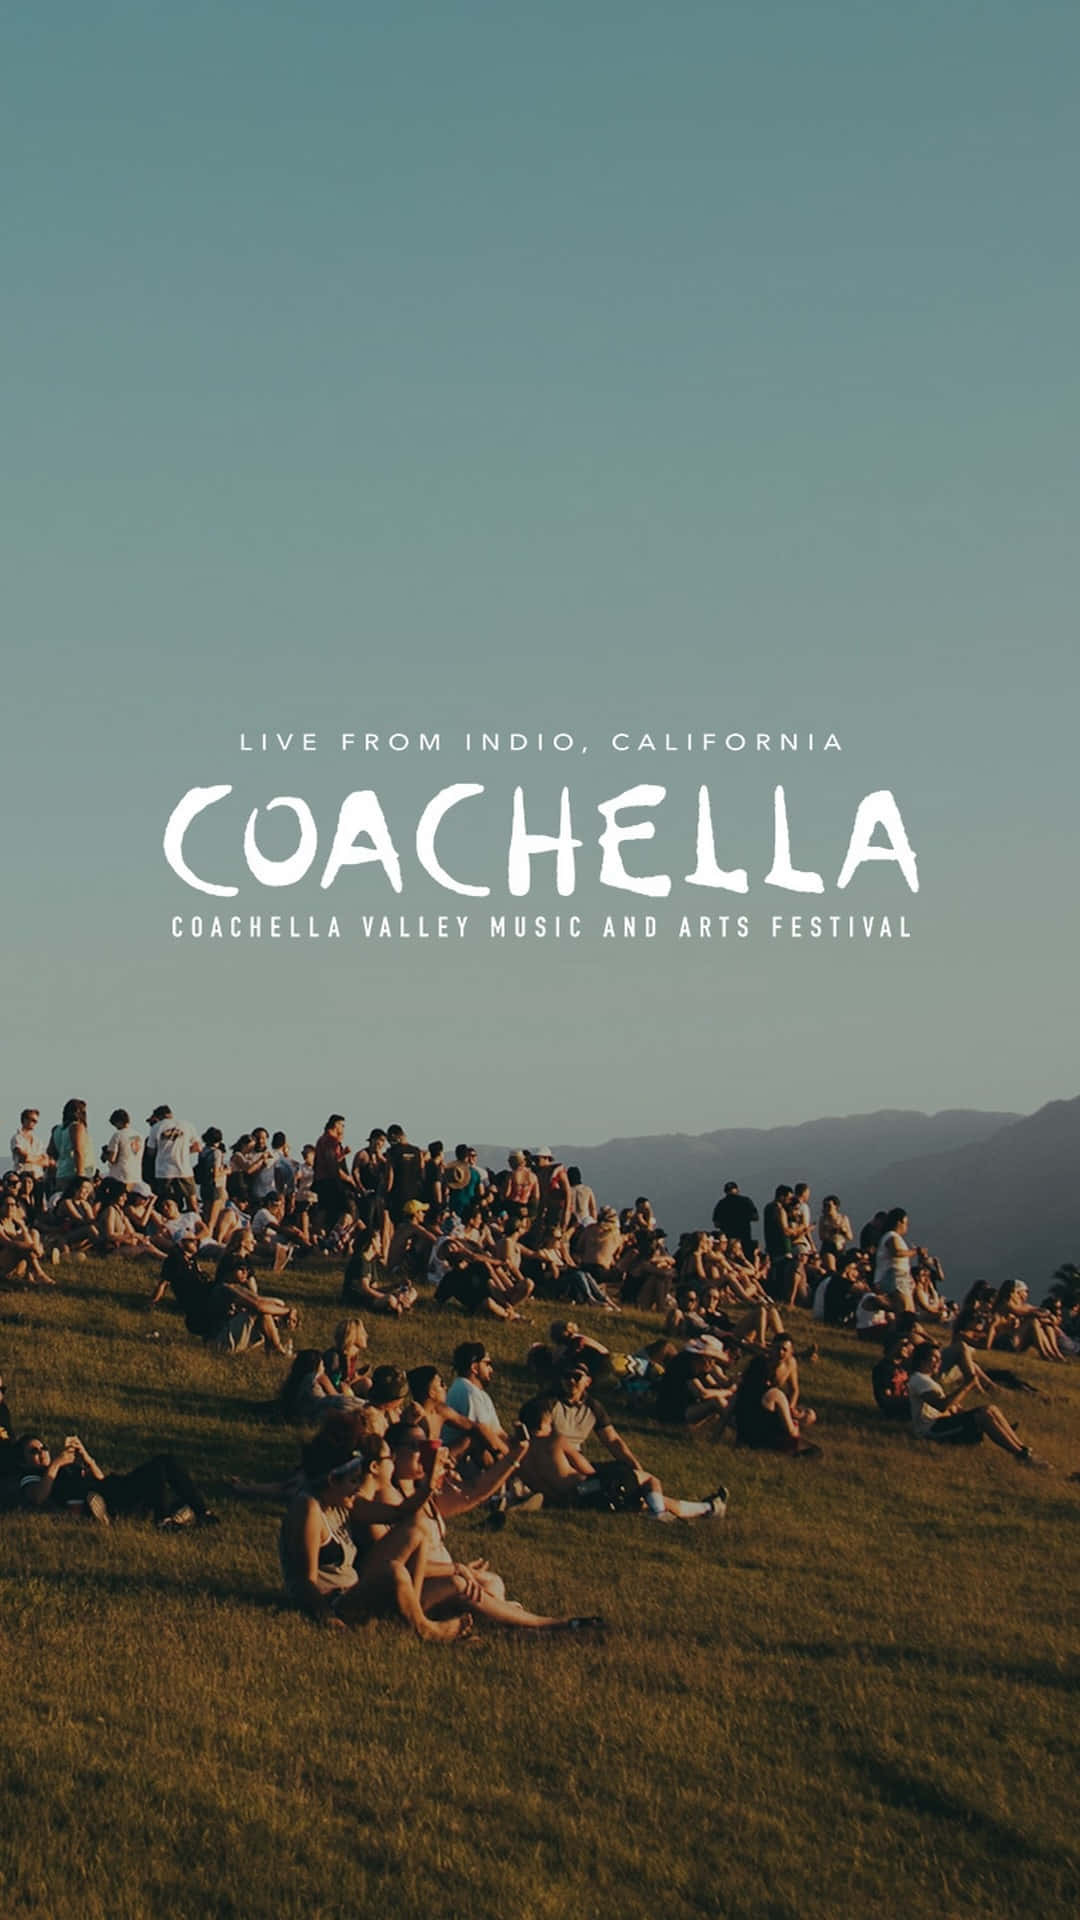 "Grab your tribal makeup and fringe leathers and get ready for an amazing experience at the world-famous Coachella Music Festival!"